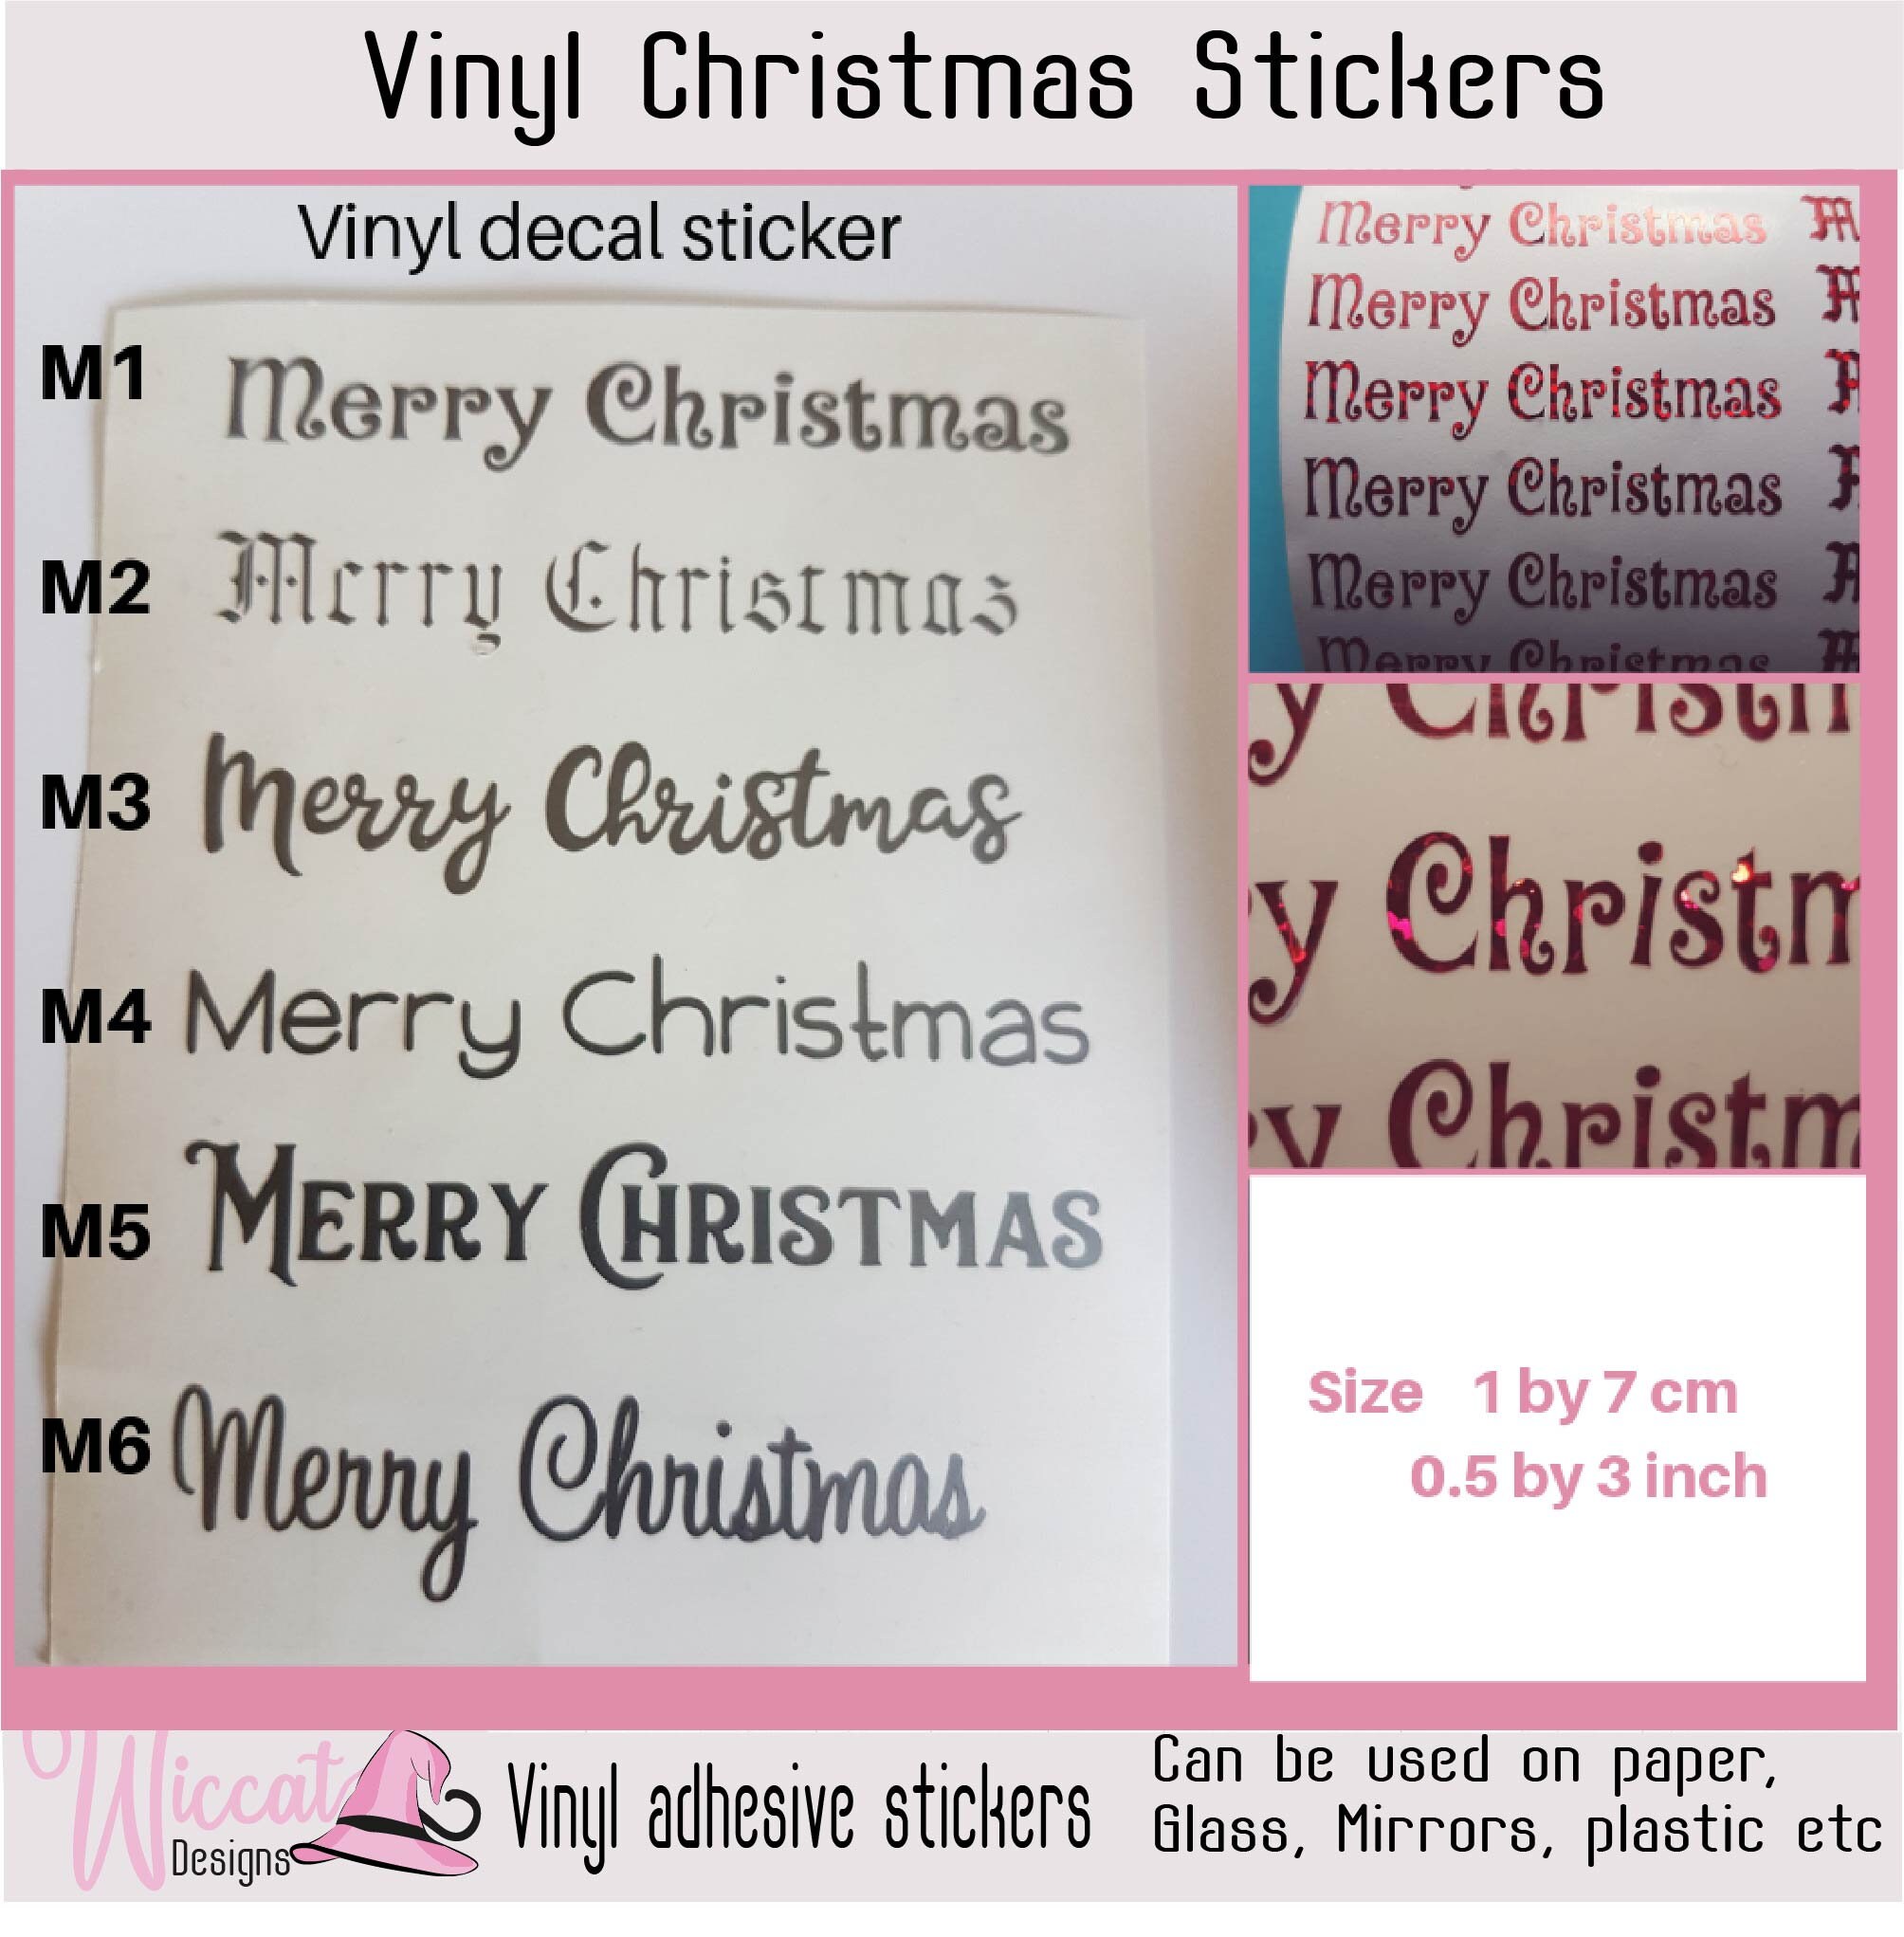 Make your first vinyl decal with me – Wiccatdesigns